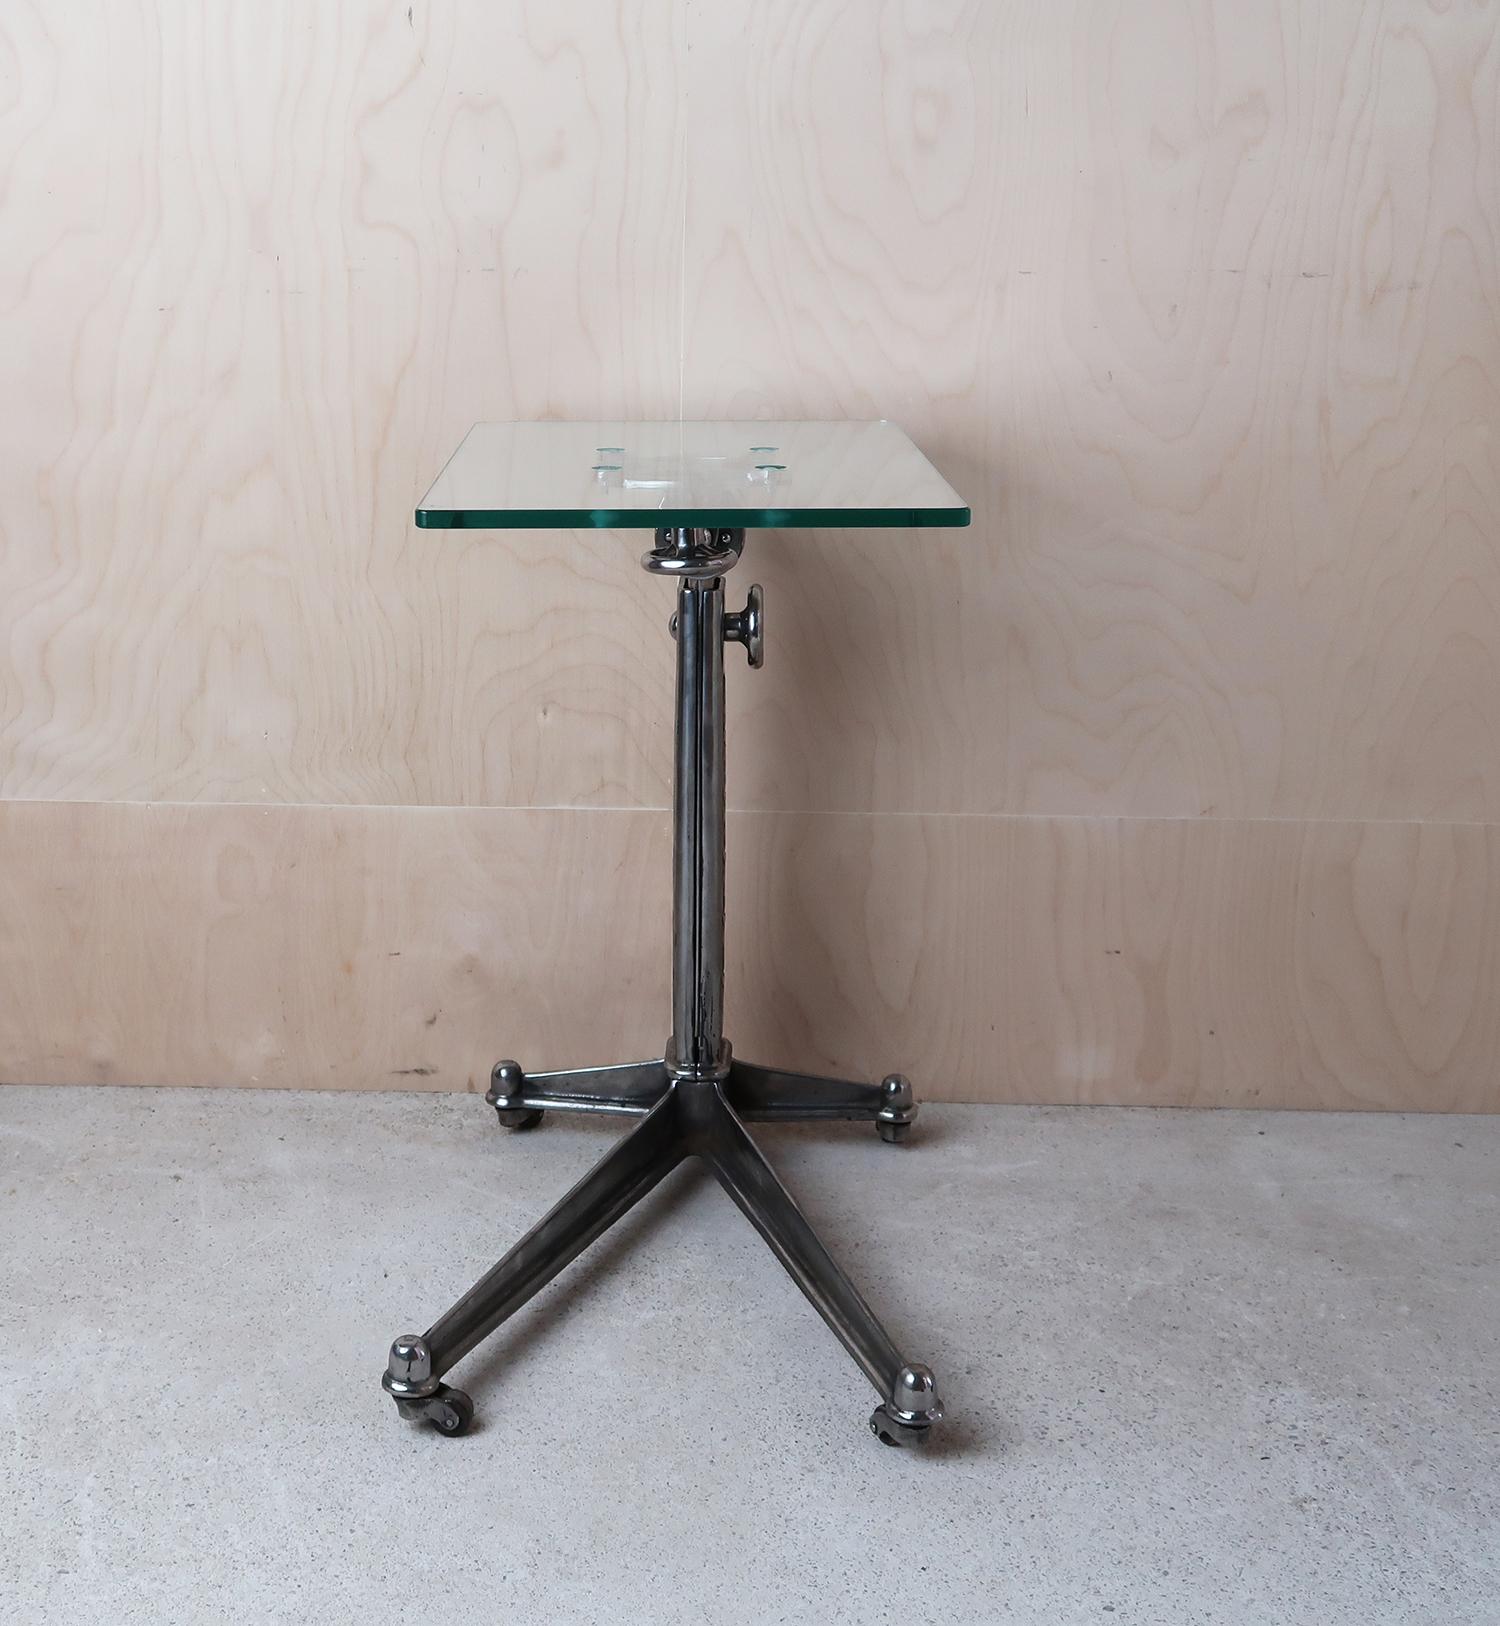 Steel Vintage Industrial Adjustable High to Low Side Table, English, C.1900 For Sale